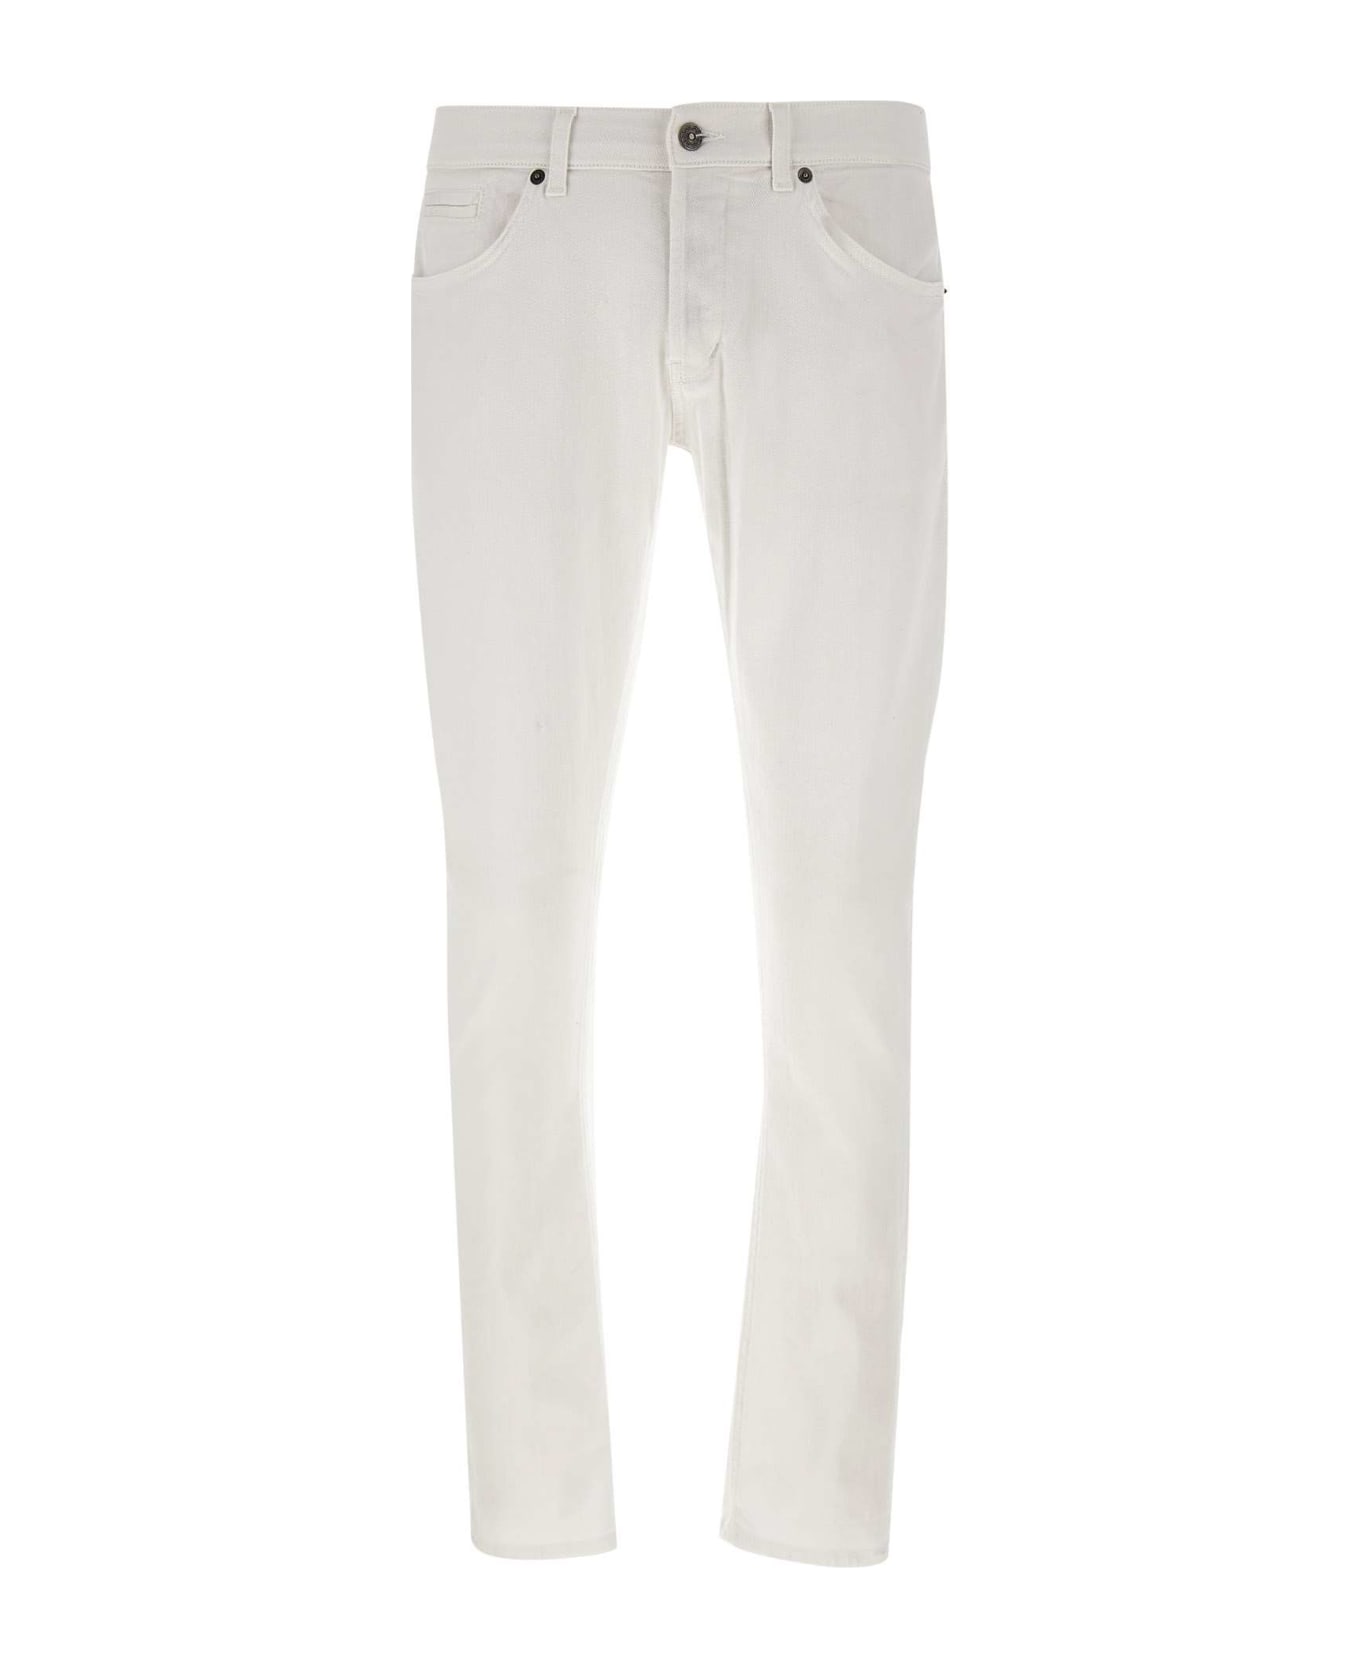 Dondup "george" Jeans - WHITE